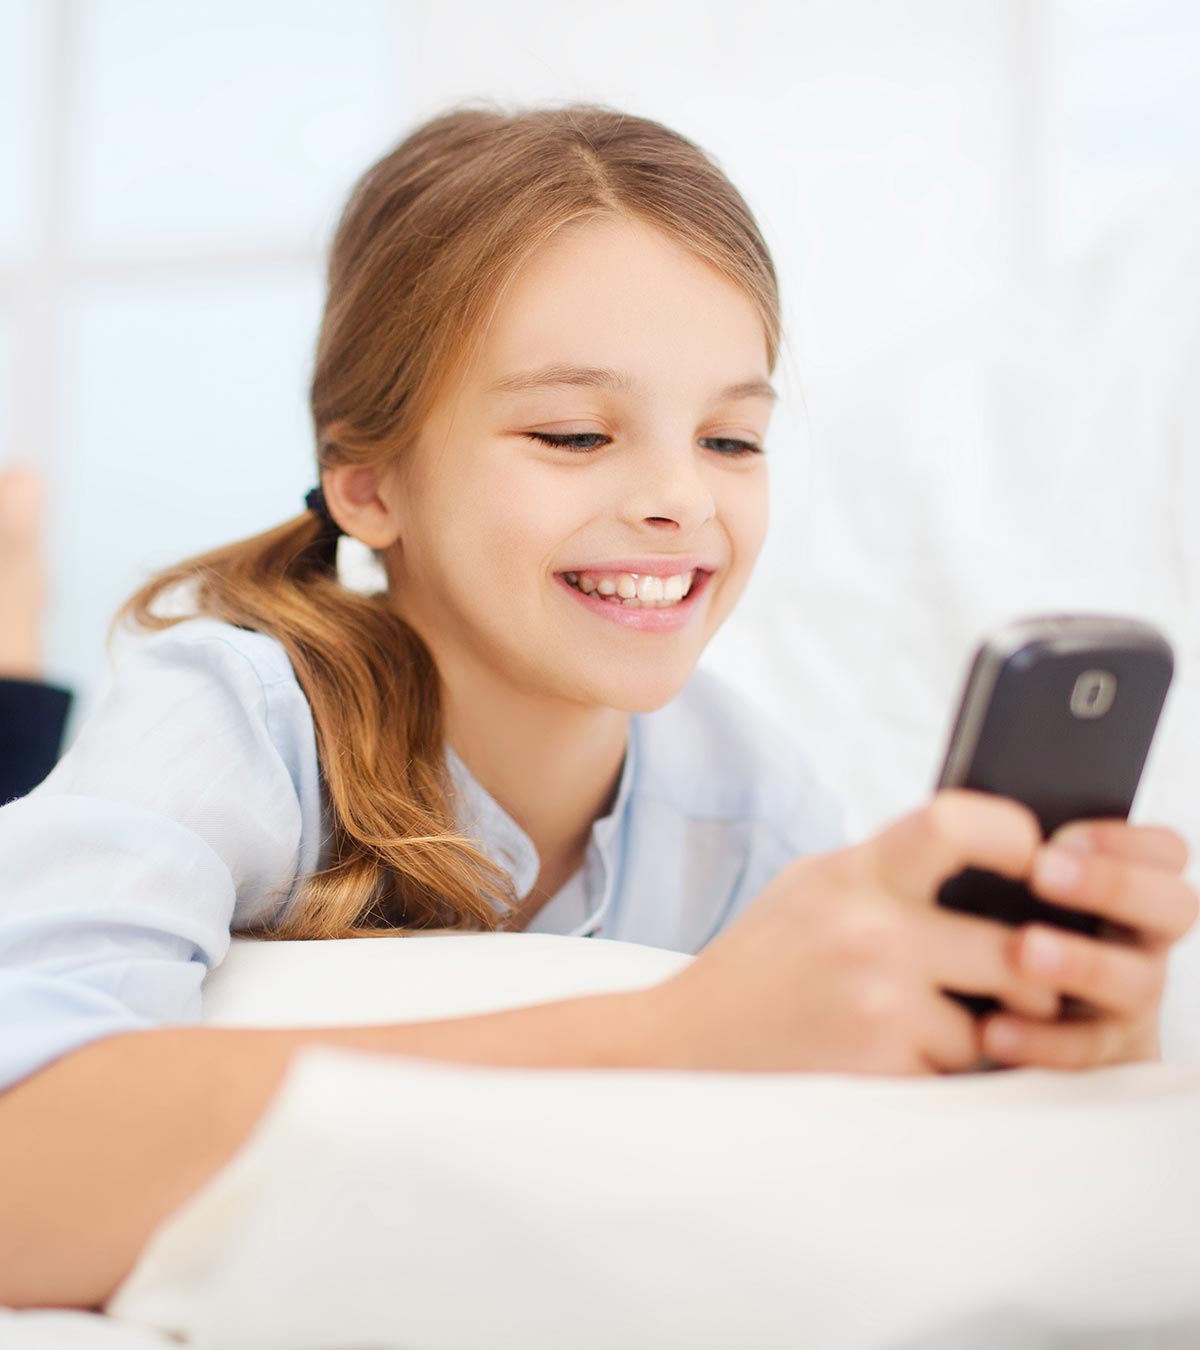 4 Harmful Effects Of Mobile Phones On Kids